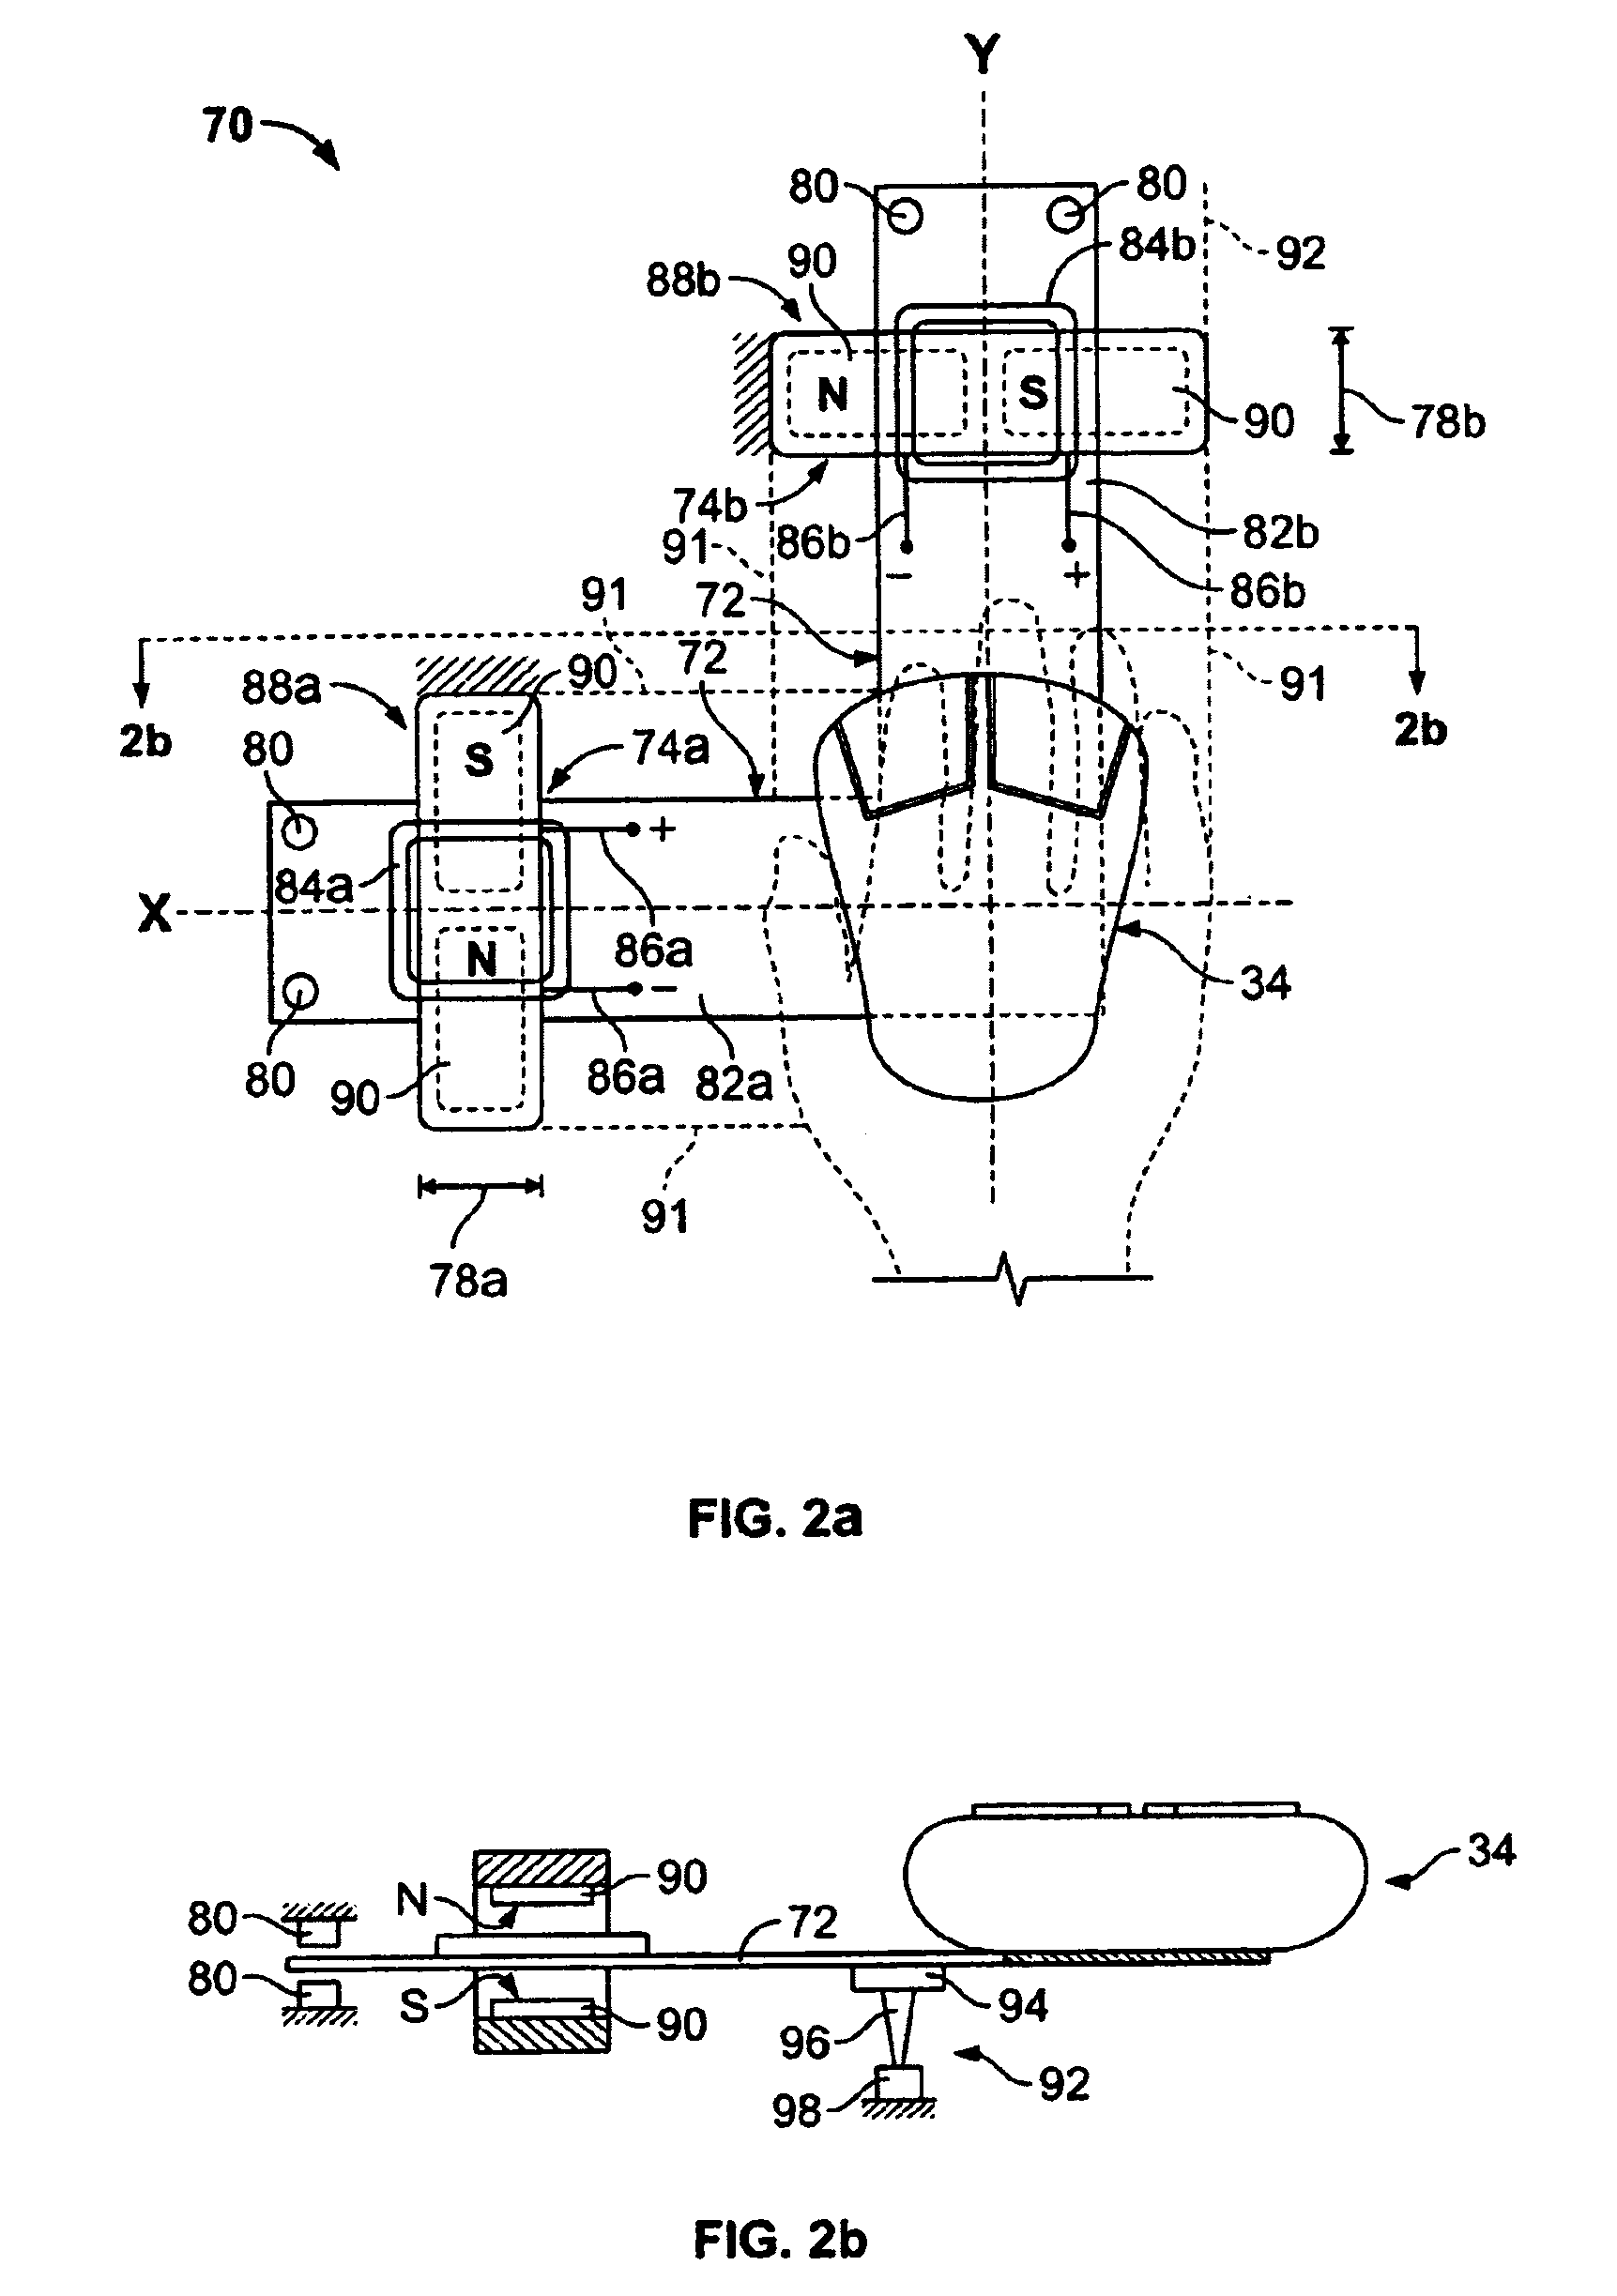 Method and apparatus for providing dynamic force sensations for force feedback computer applications